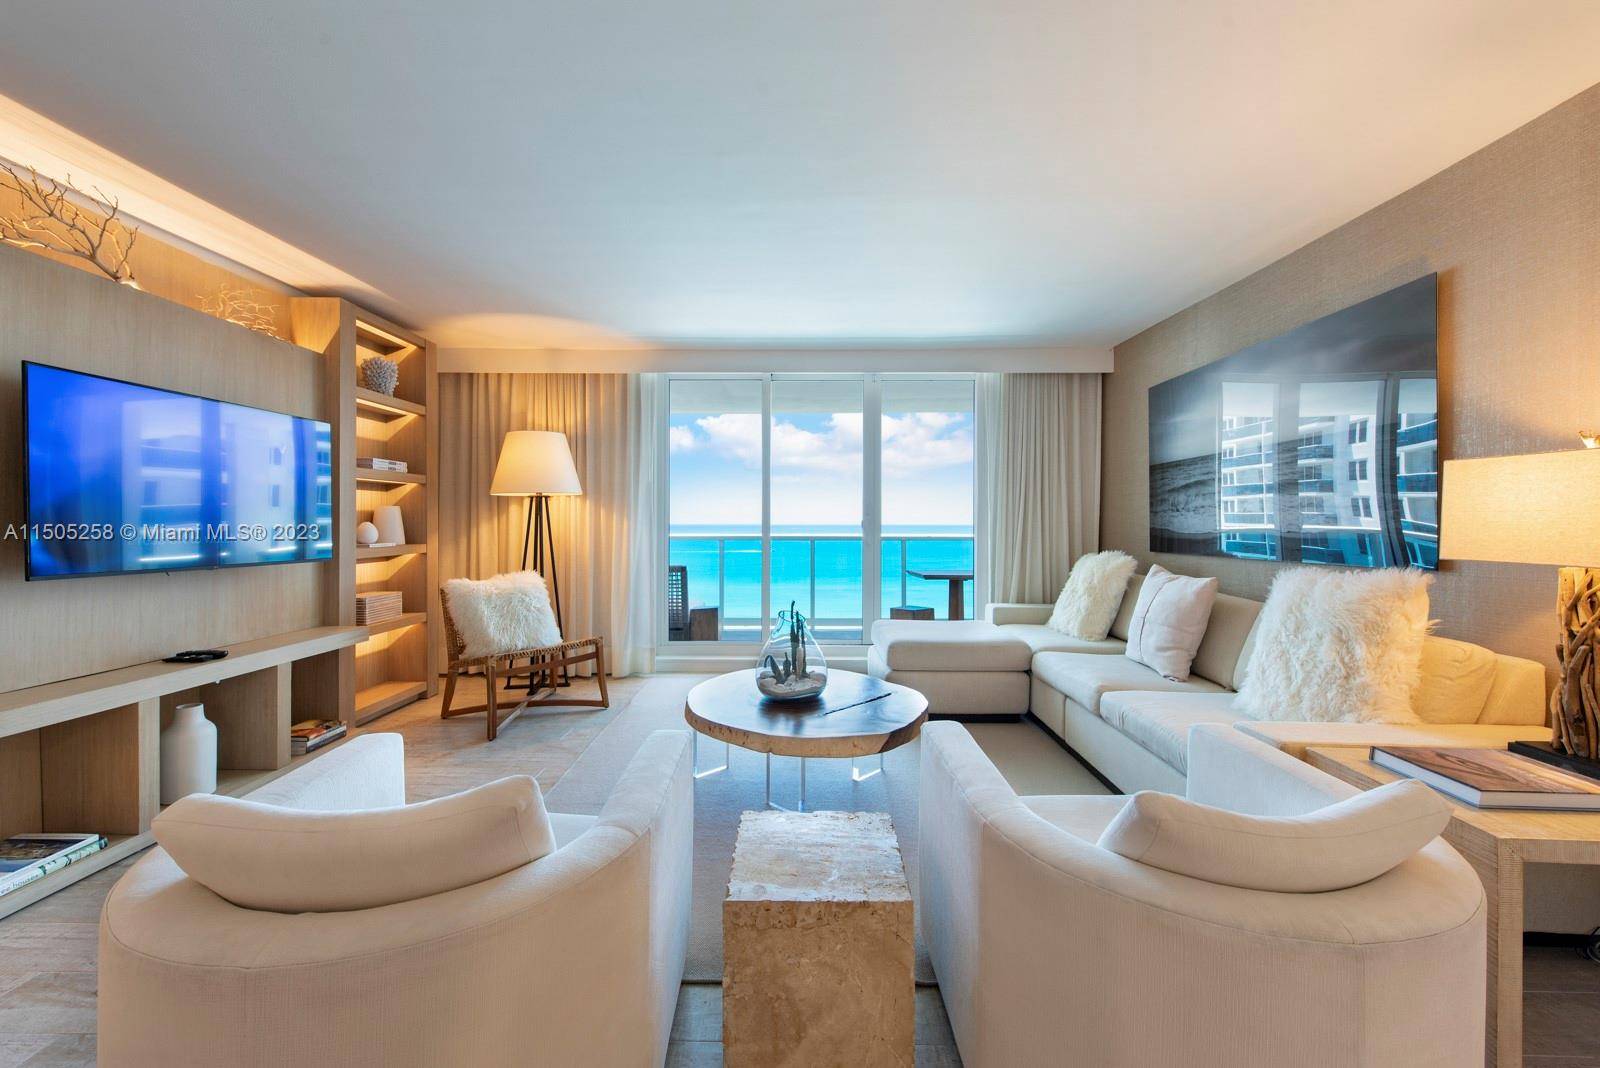 AVAILABLE NOW... Unique 3 3 with direct ocean views from every room.